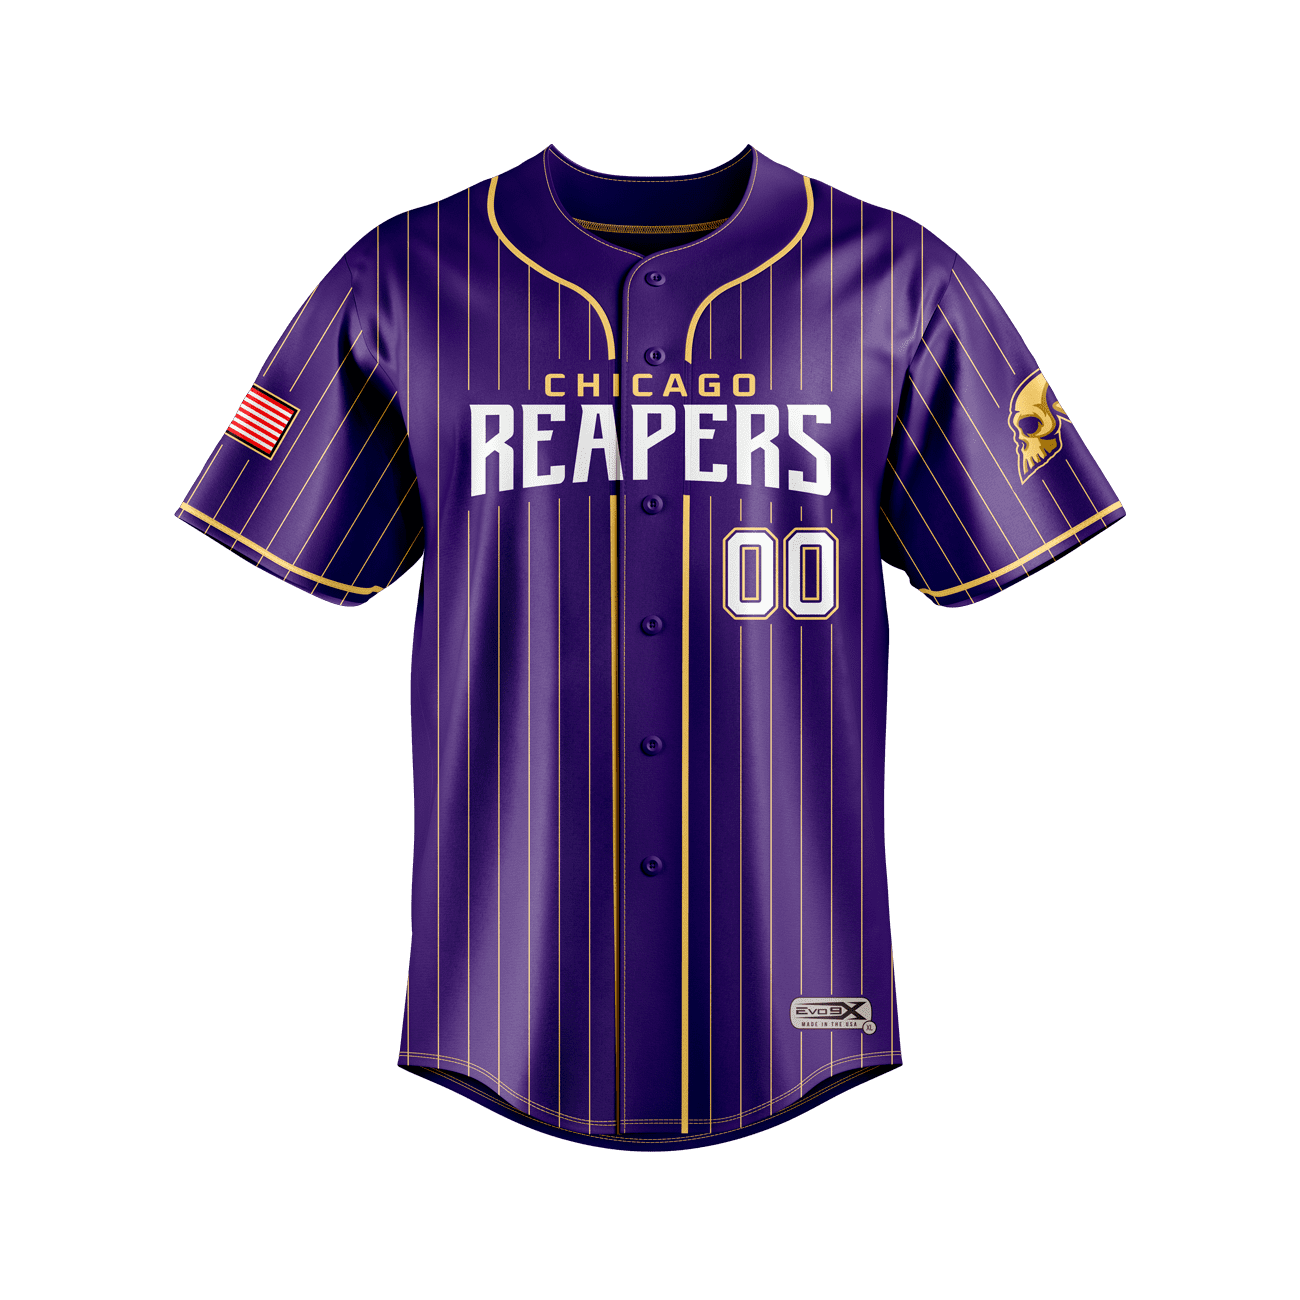 Chicago Reapers Baseball Jersey